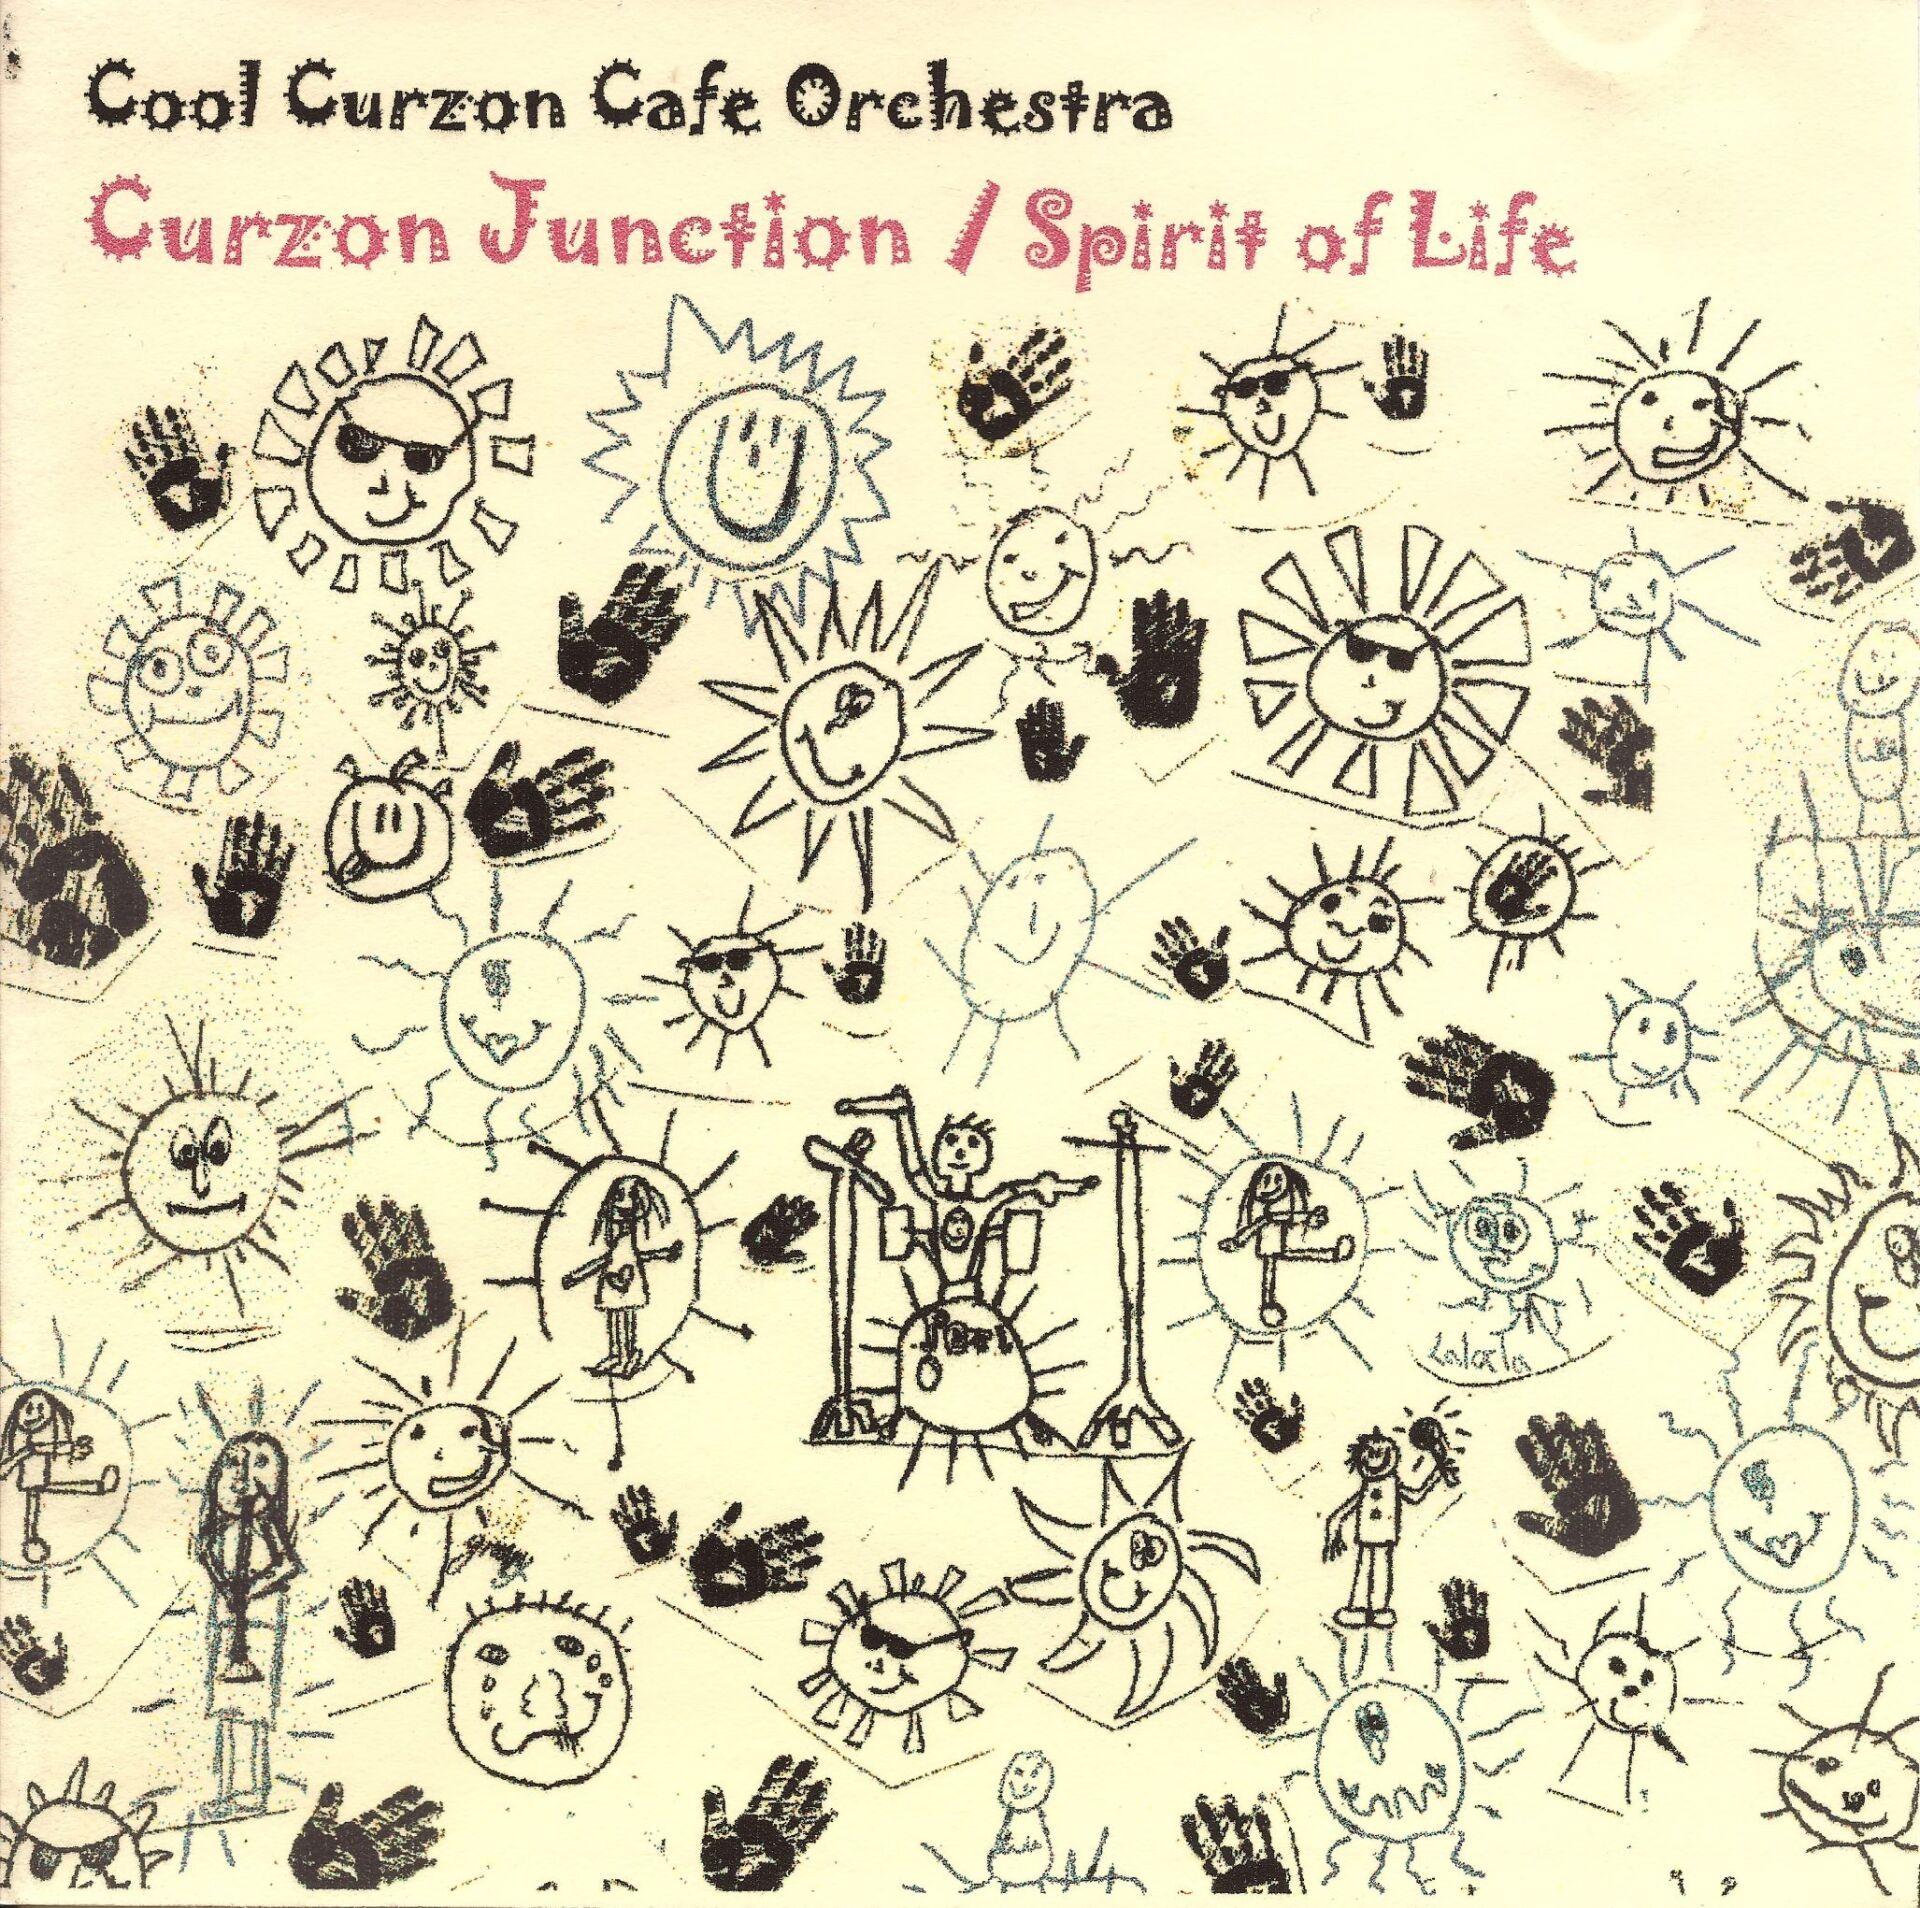 Spirit of Life  : Debbie Curtis & The Cool Curzon Cafe Orchestra